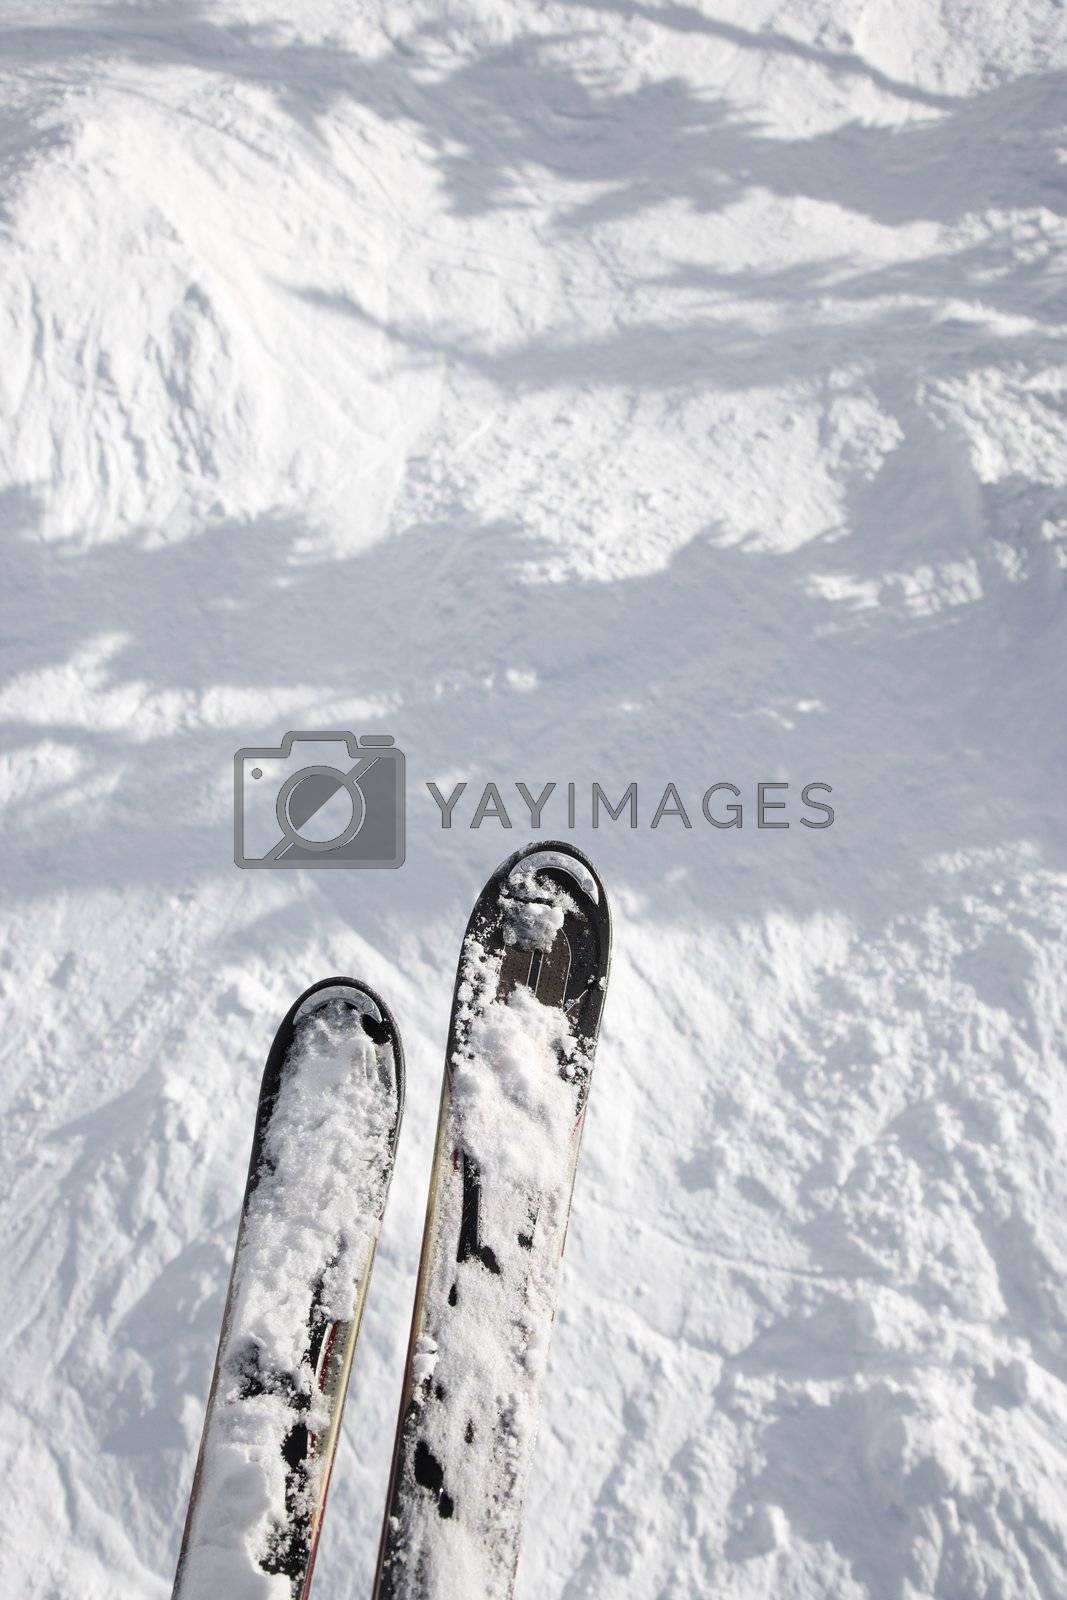 Royalty free image of Skis hanging over drop. by iofoto